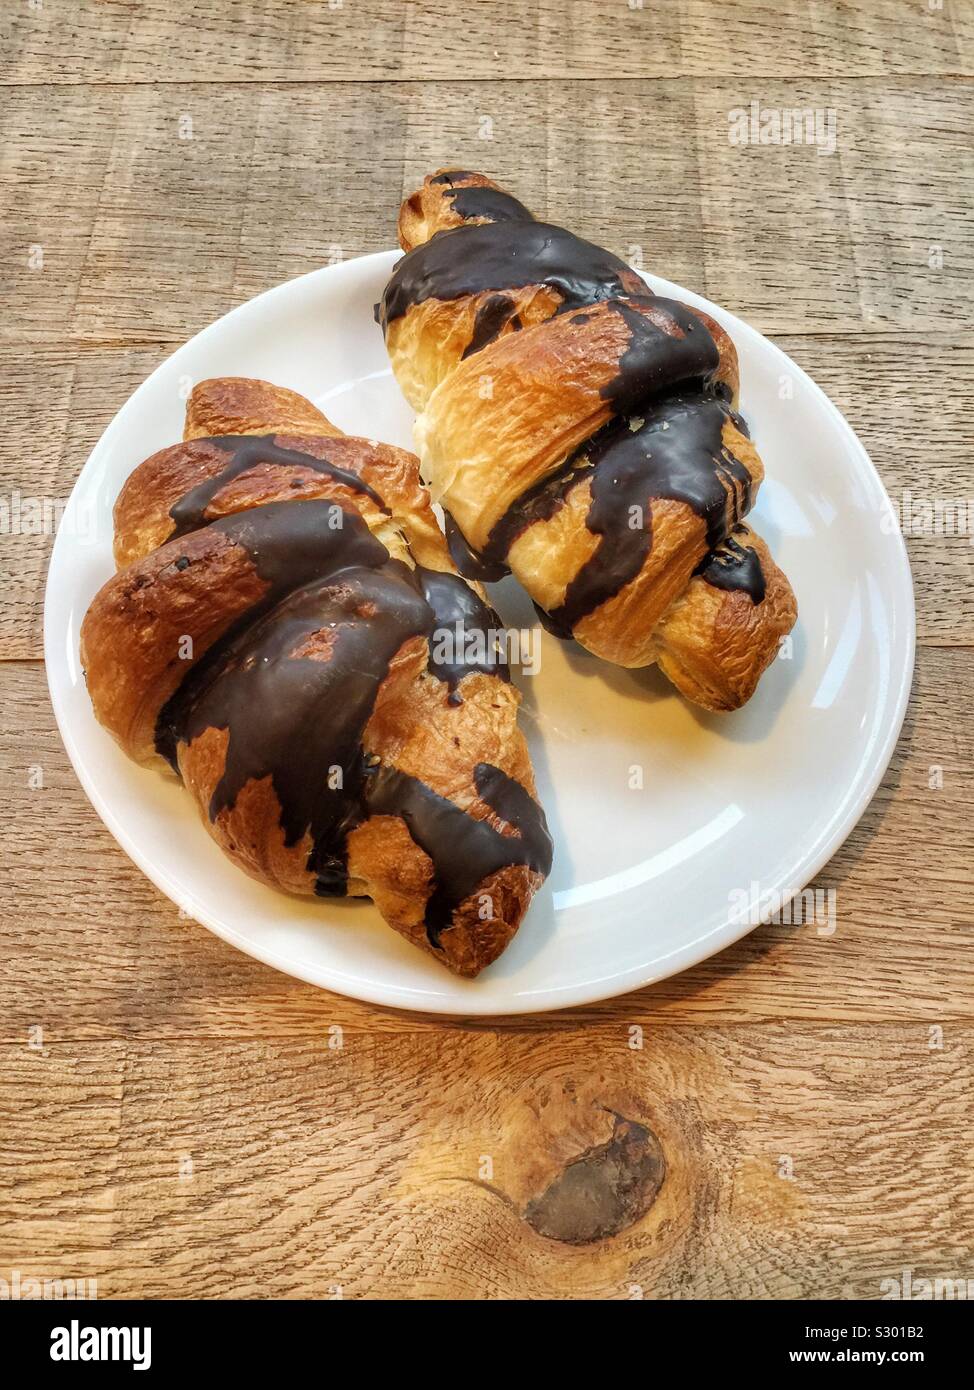 Two chocolate croissant in a plate Stock Photo